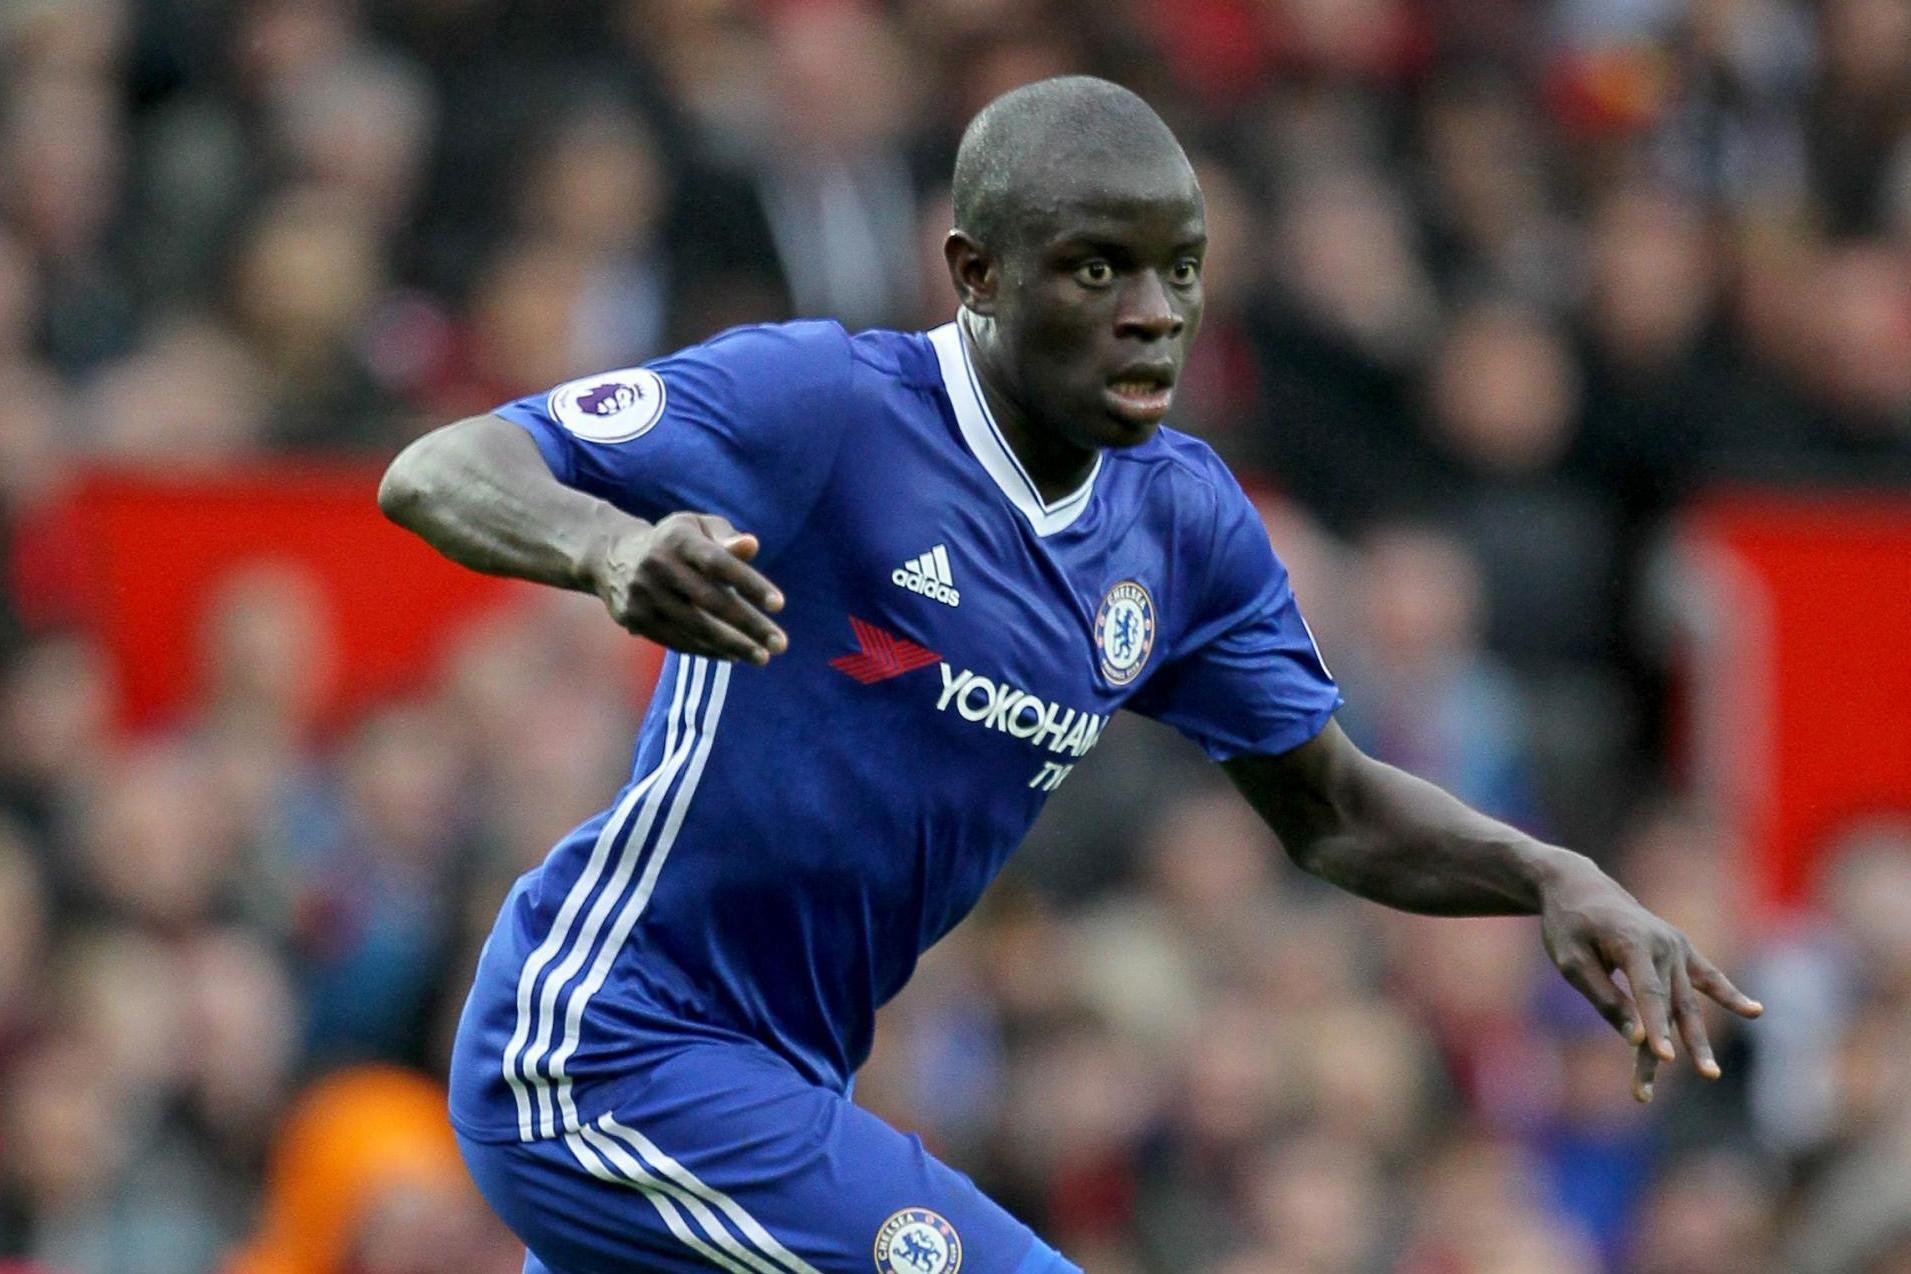 N'Golo Kante has endured a fine season and looks set to win the Premier League title in back-to-back years